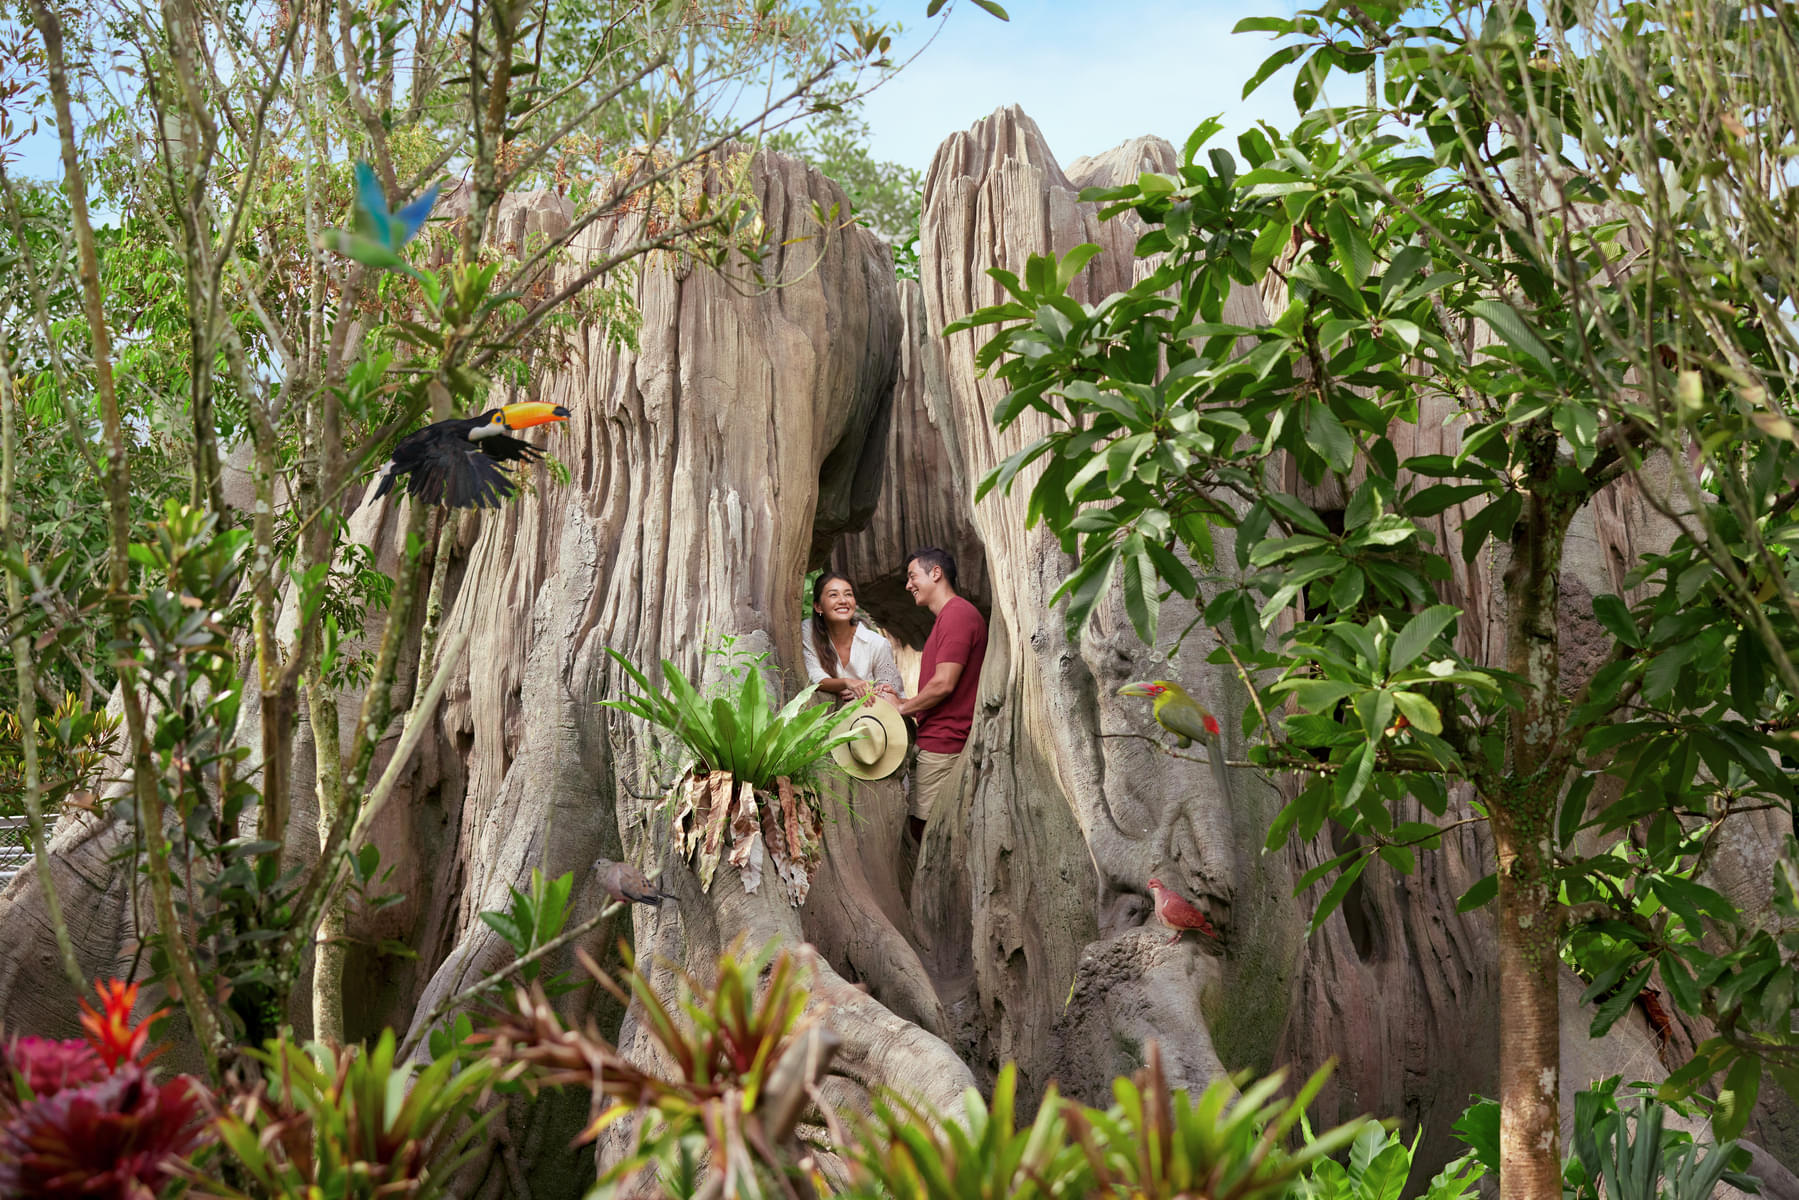 Enjoy a fun filled day with your family exploring the Bird Paradise